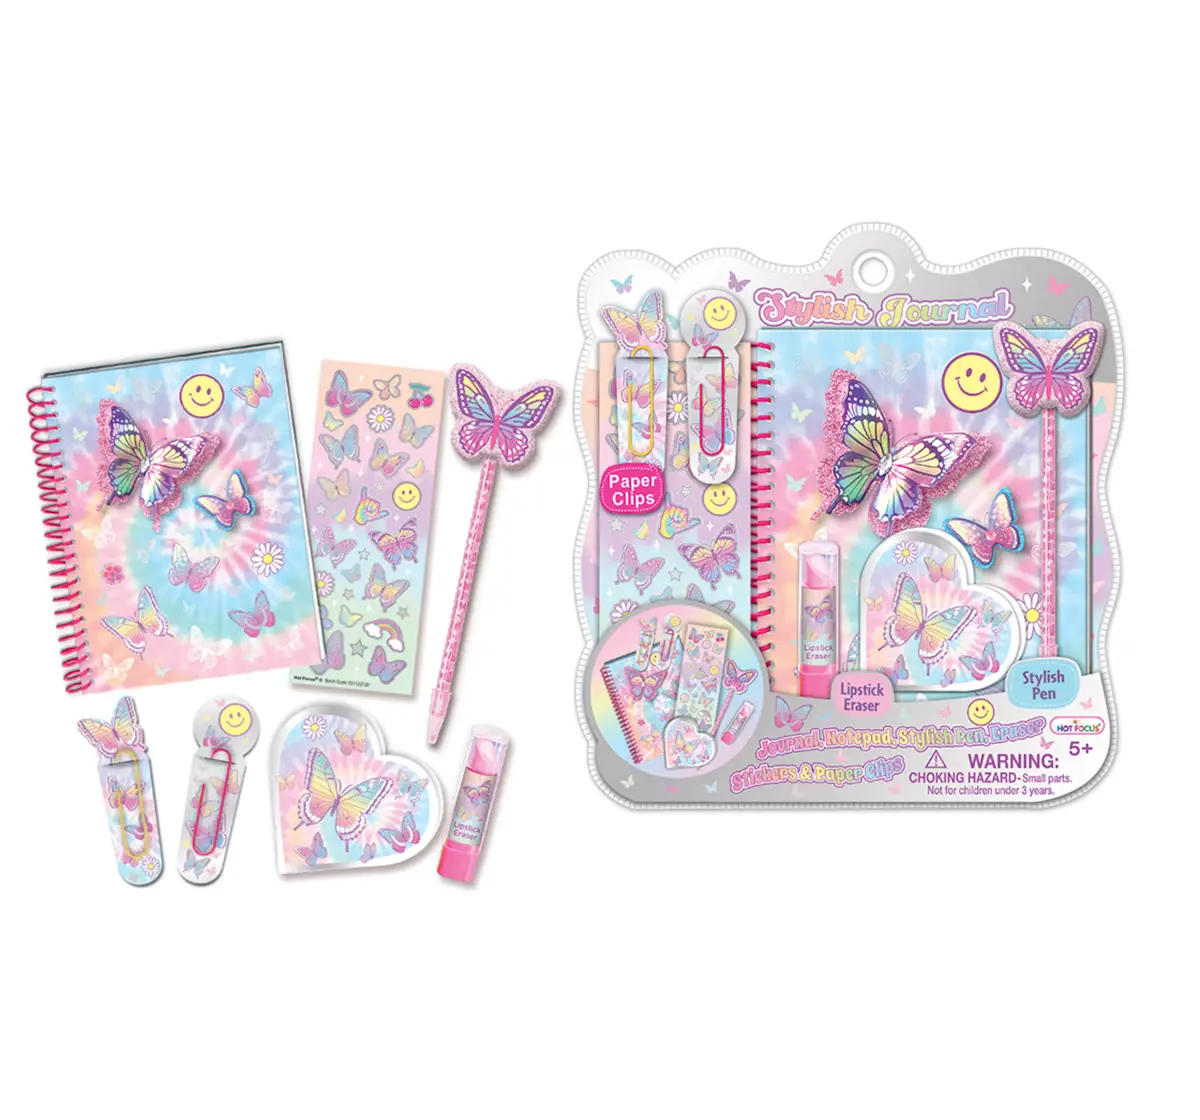 Hot Focus Stylish Journal Butterfly, 5Y+